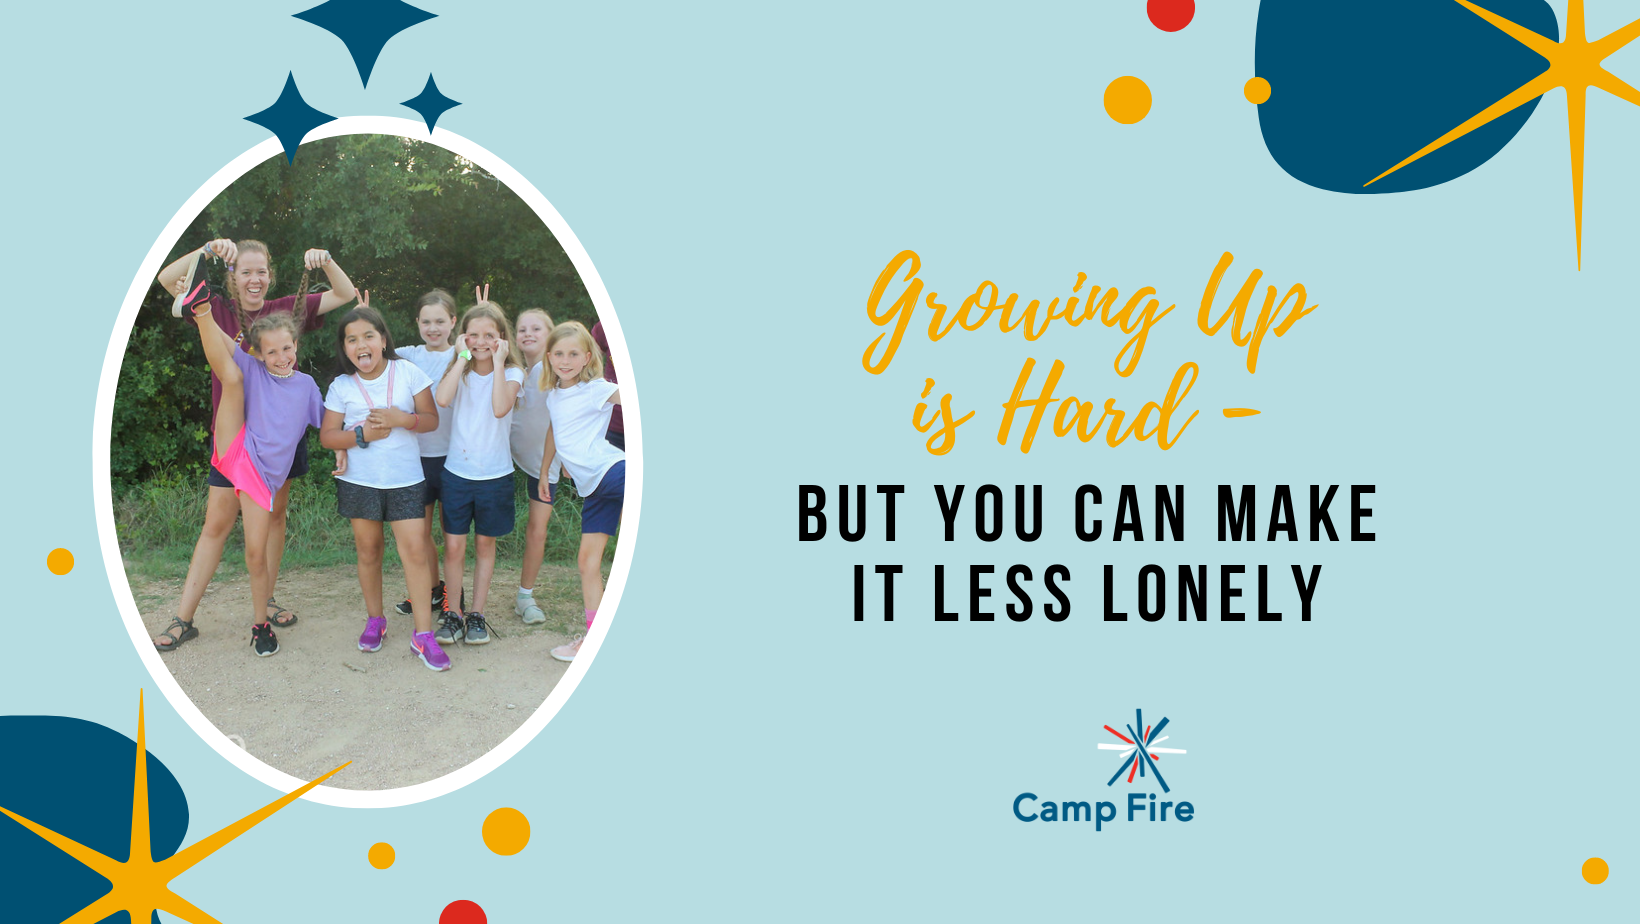 Growing Up is Hard – But You Can Make it Less Lonely, a Camp Fire blog